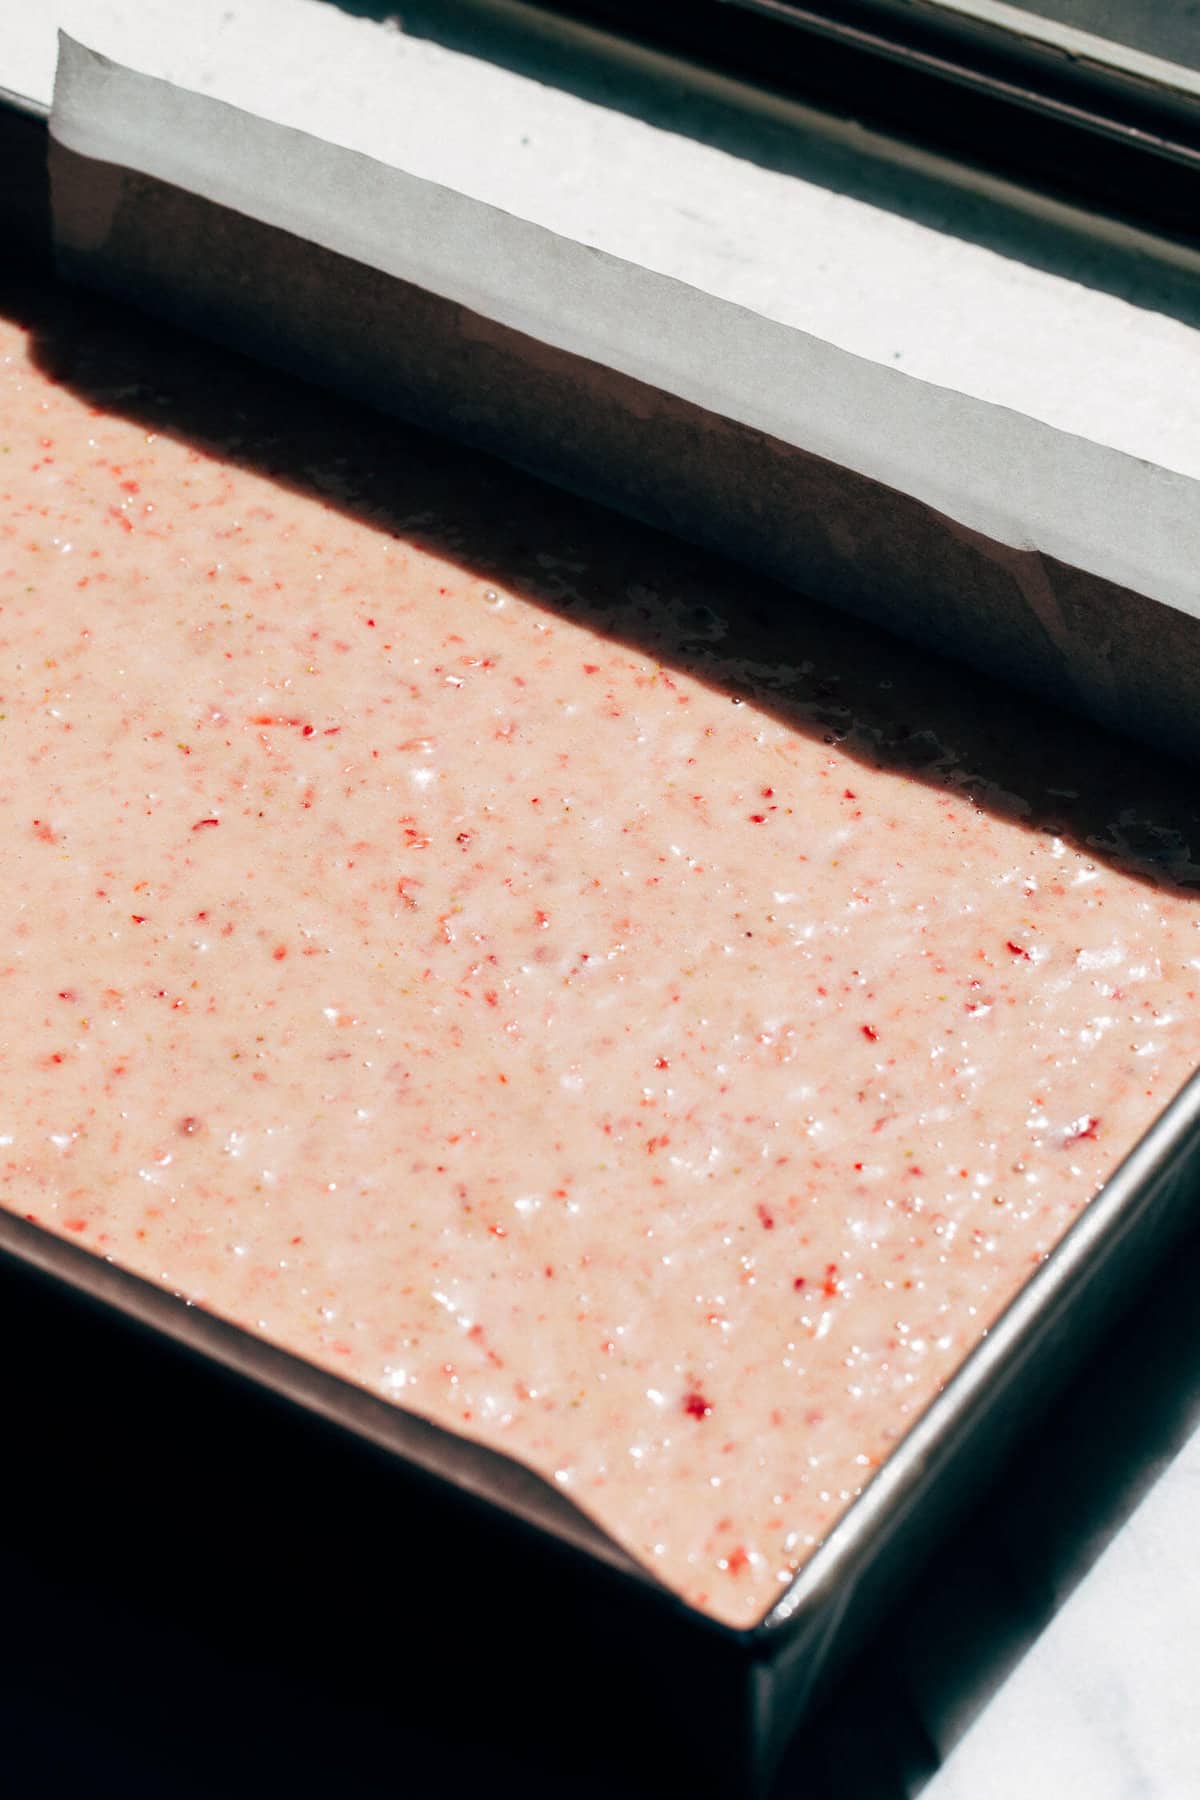 strawberry cake batter in a baking pan